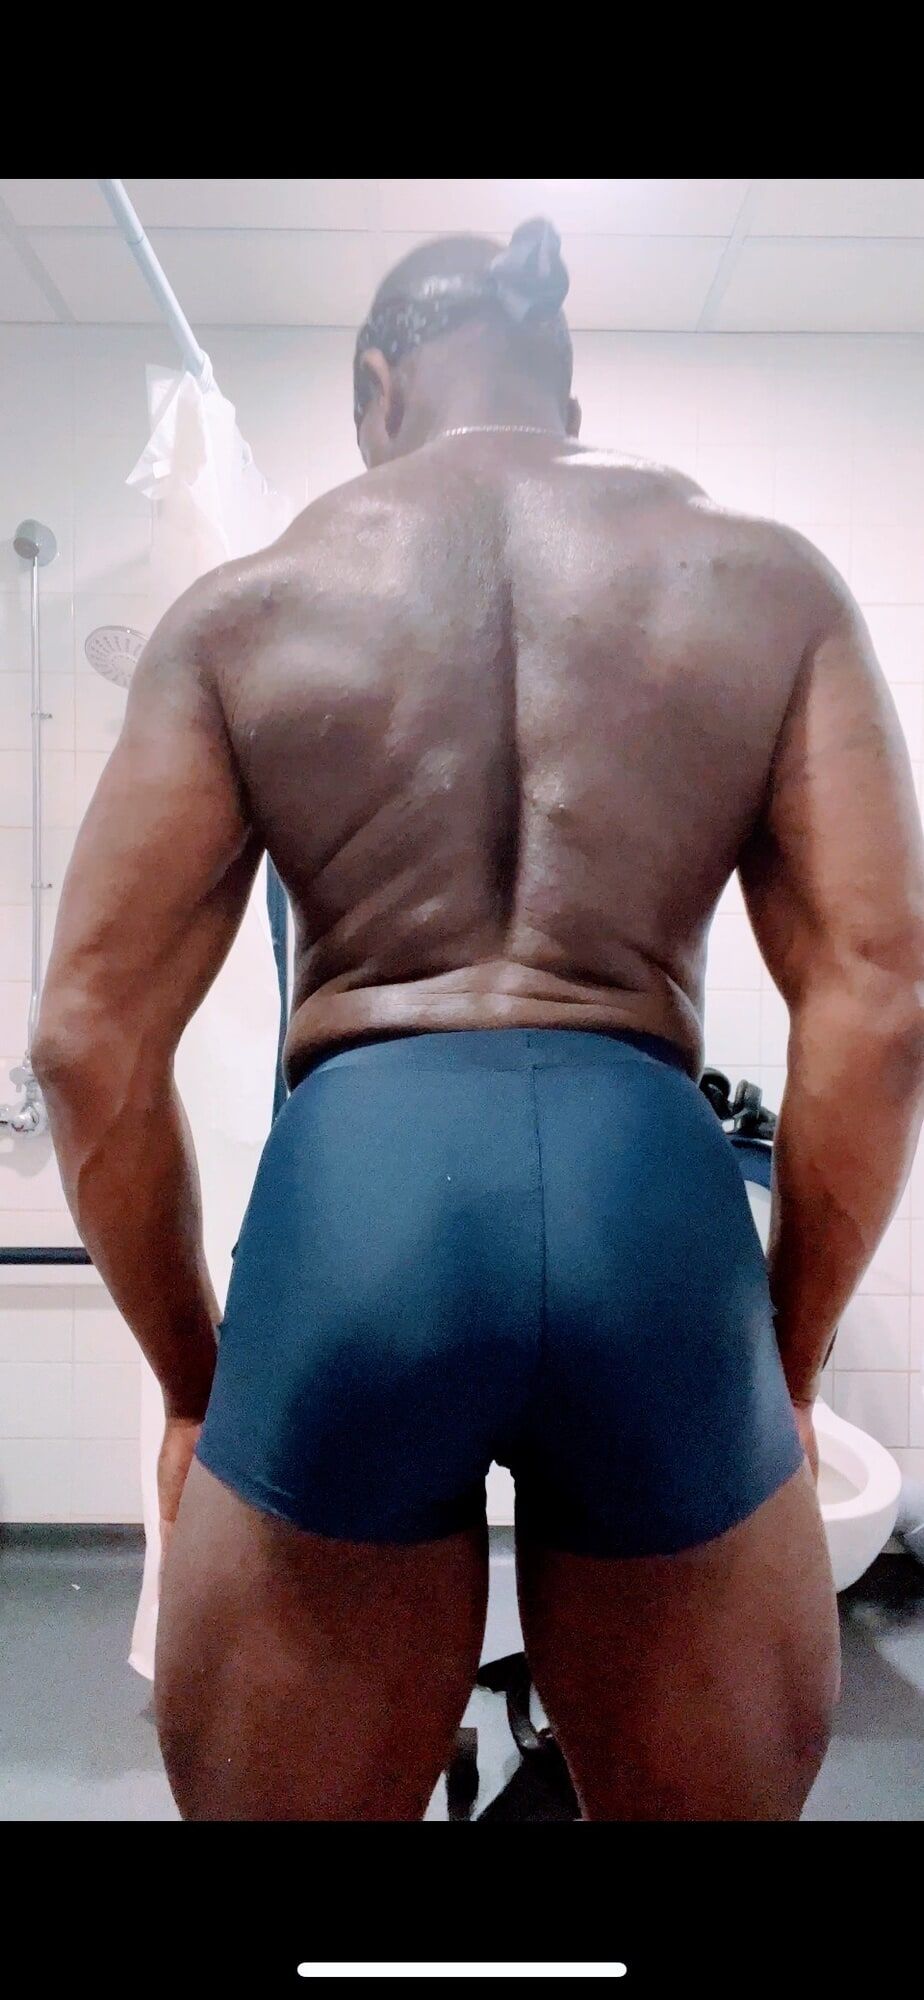  Muscle Butt Dad #14